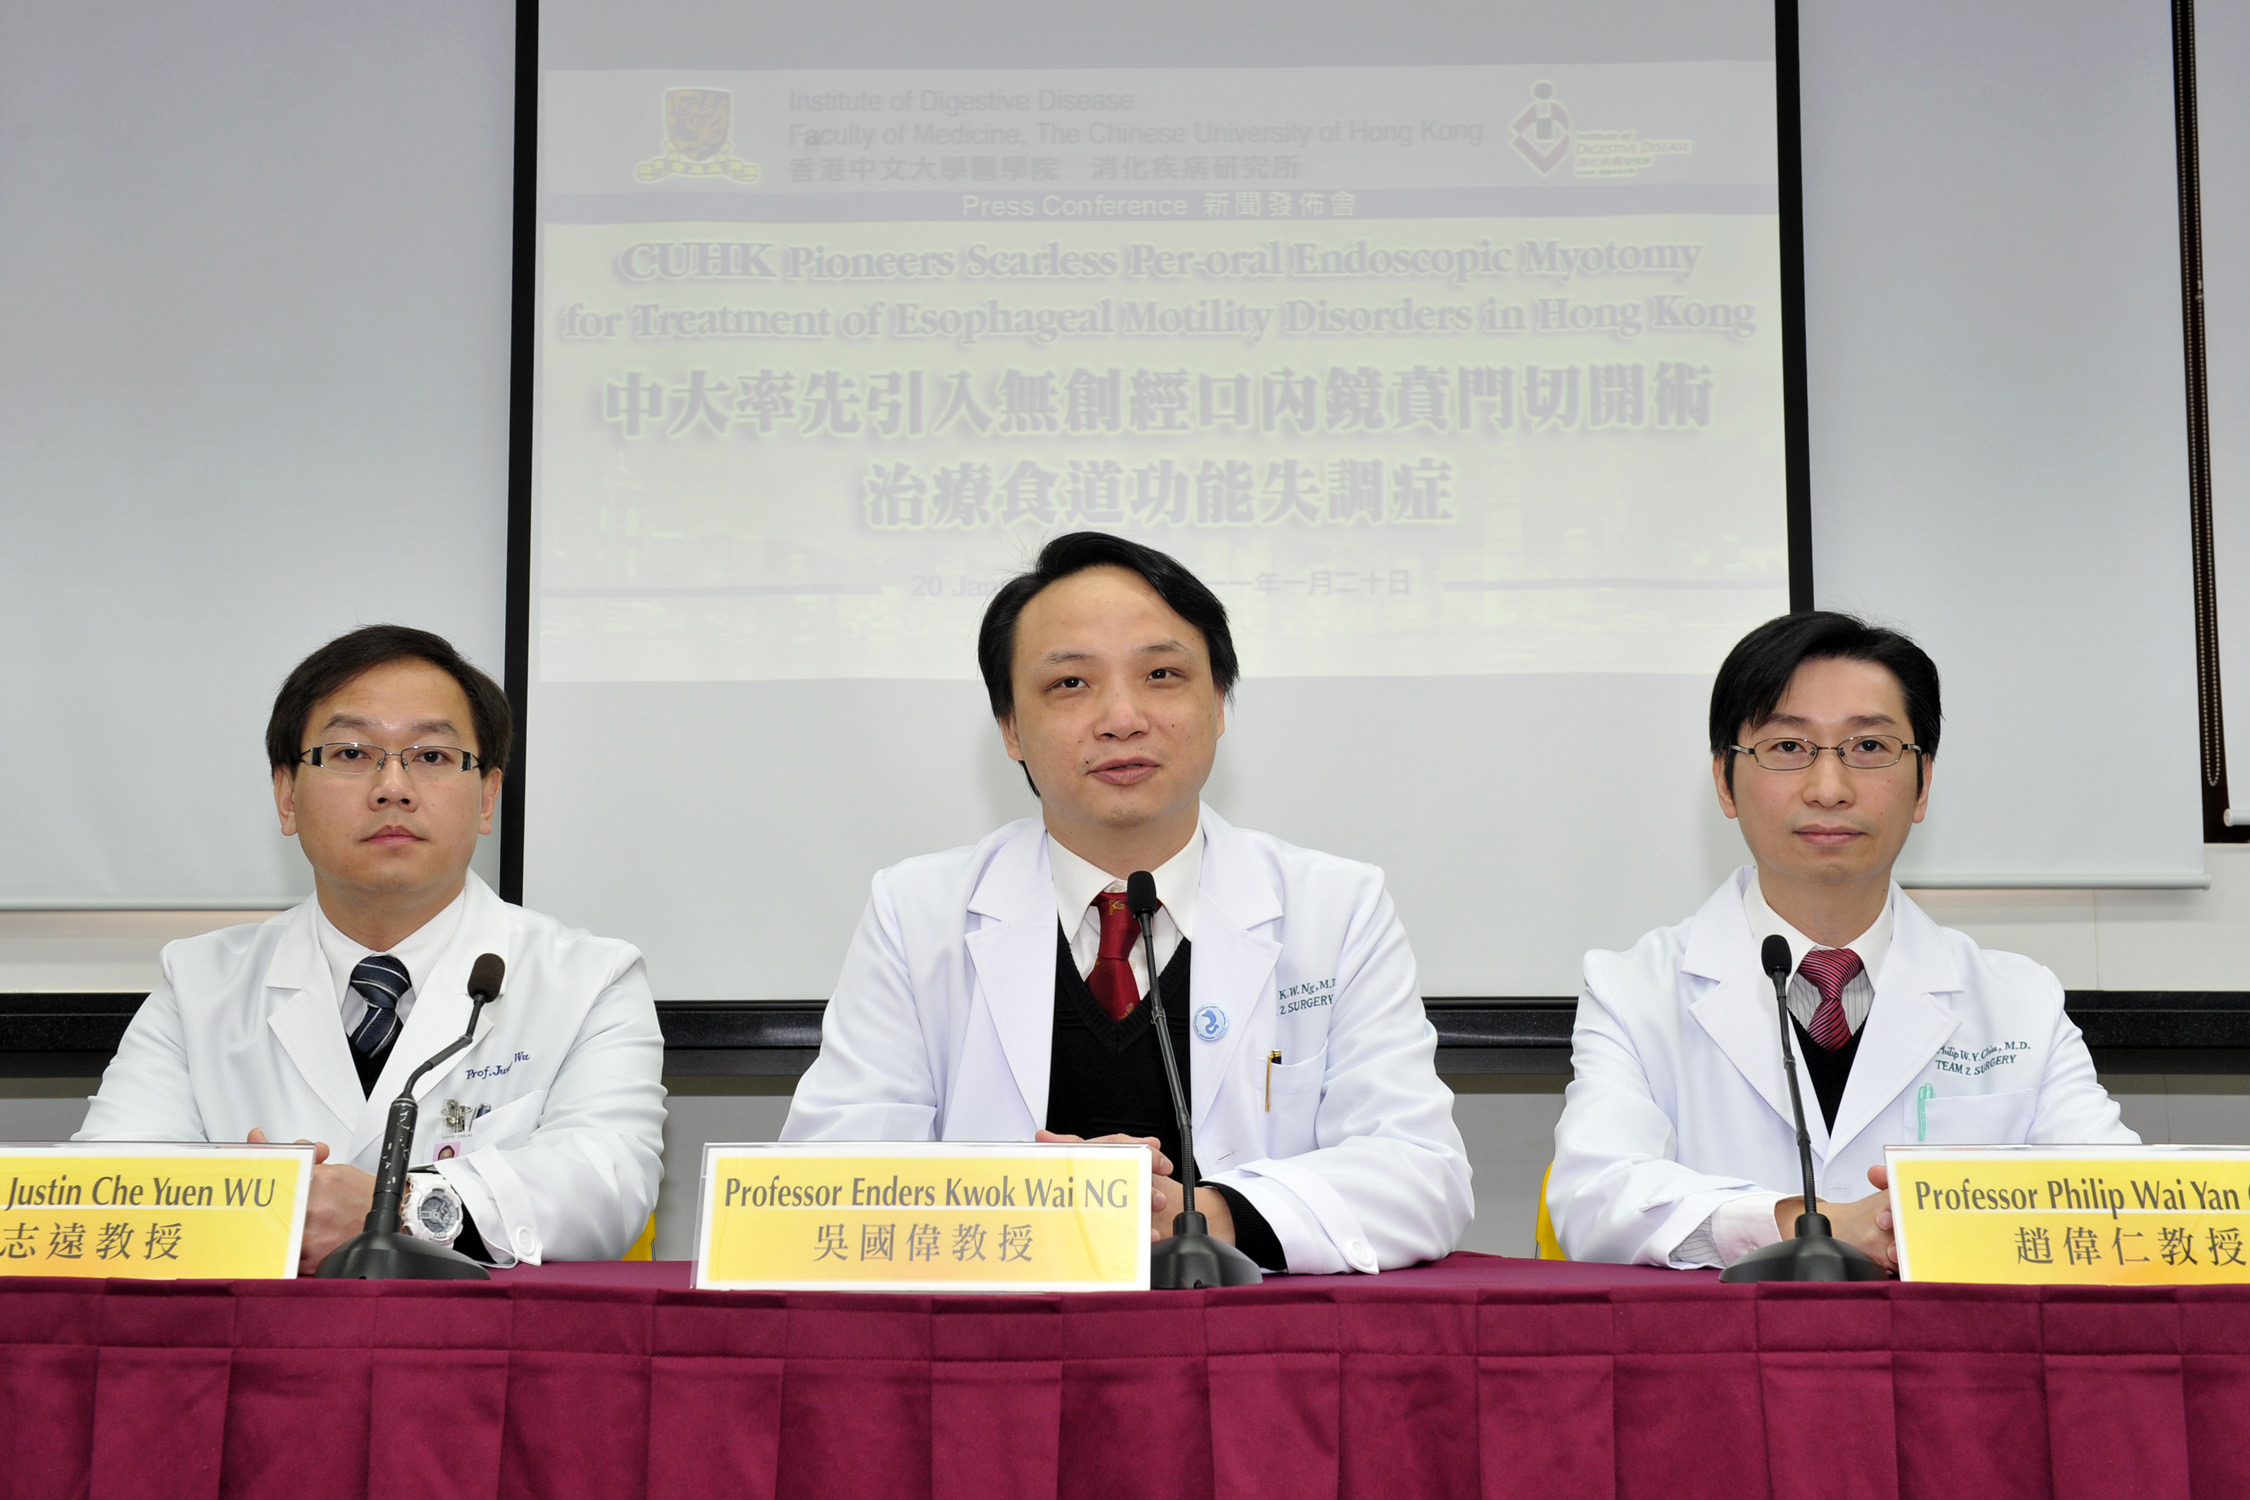 (From left) Prof. Justin Che Yuen WU, Professor, Department of Medicine and Therapeutics, CUHK; Prof. Enders Kwok Wai NG, Head of Division of Upper Gastrointestinal Surgery, Department of Surgery, CUHK; and Prof. Philip Wai Yan CHIU, Professor, Division of Upper Gastrointestinal Surgery, Department of Surgery, CUHK